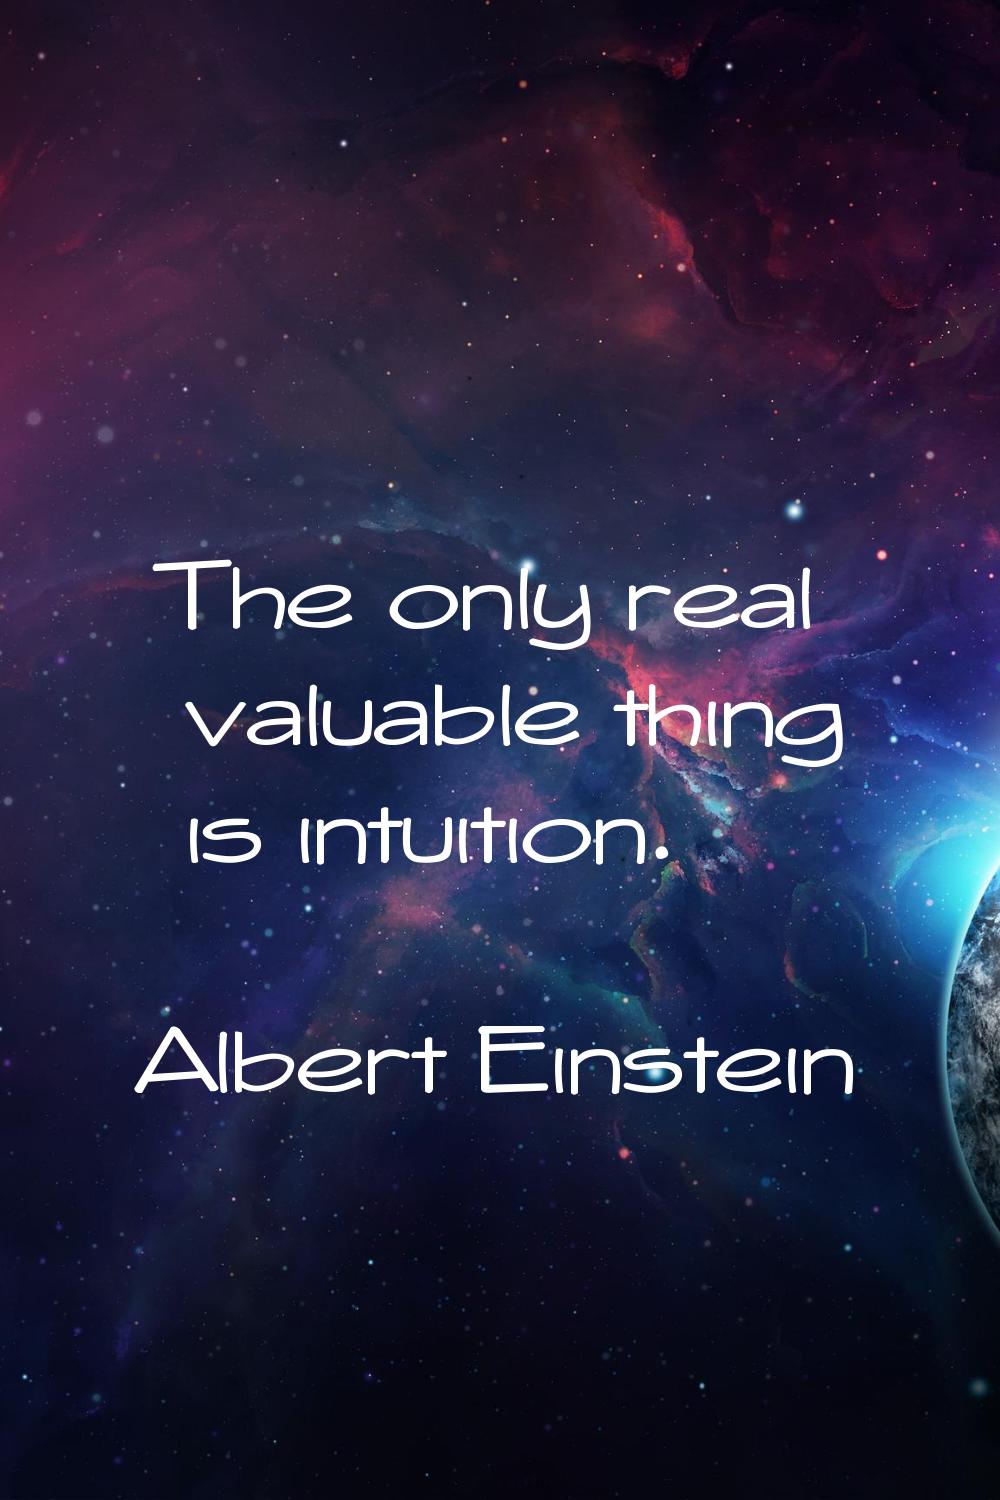 The only real valuable thing is intuition.